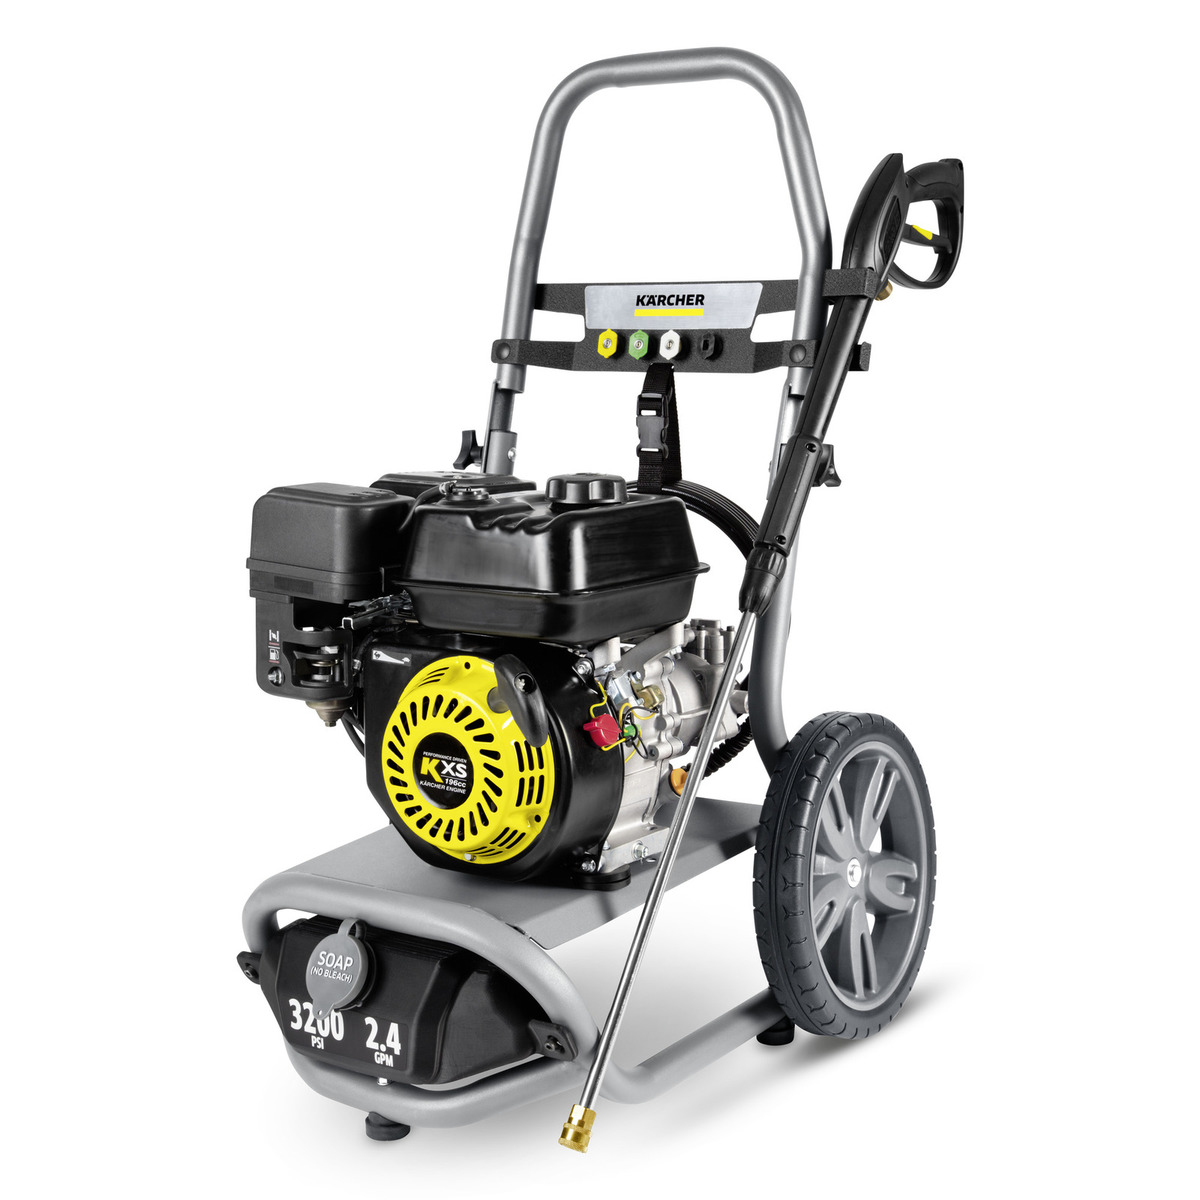 Karcher 1.107.387.0 Pressure Washer, Gas, 196 cc Engine Displacement, Axial Cam Pump, 3200 psi Operating, 2.4 gpm - 1